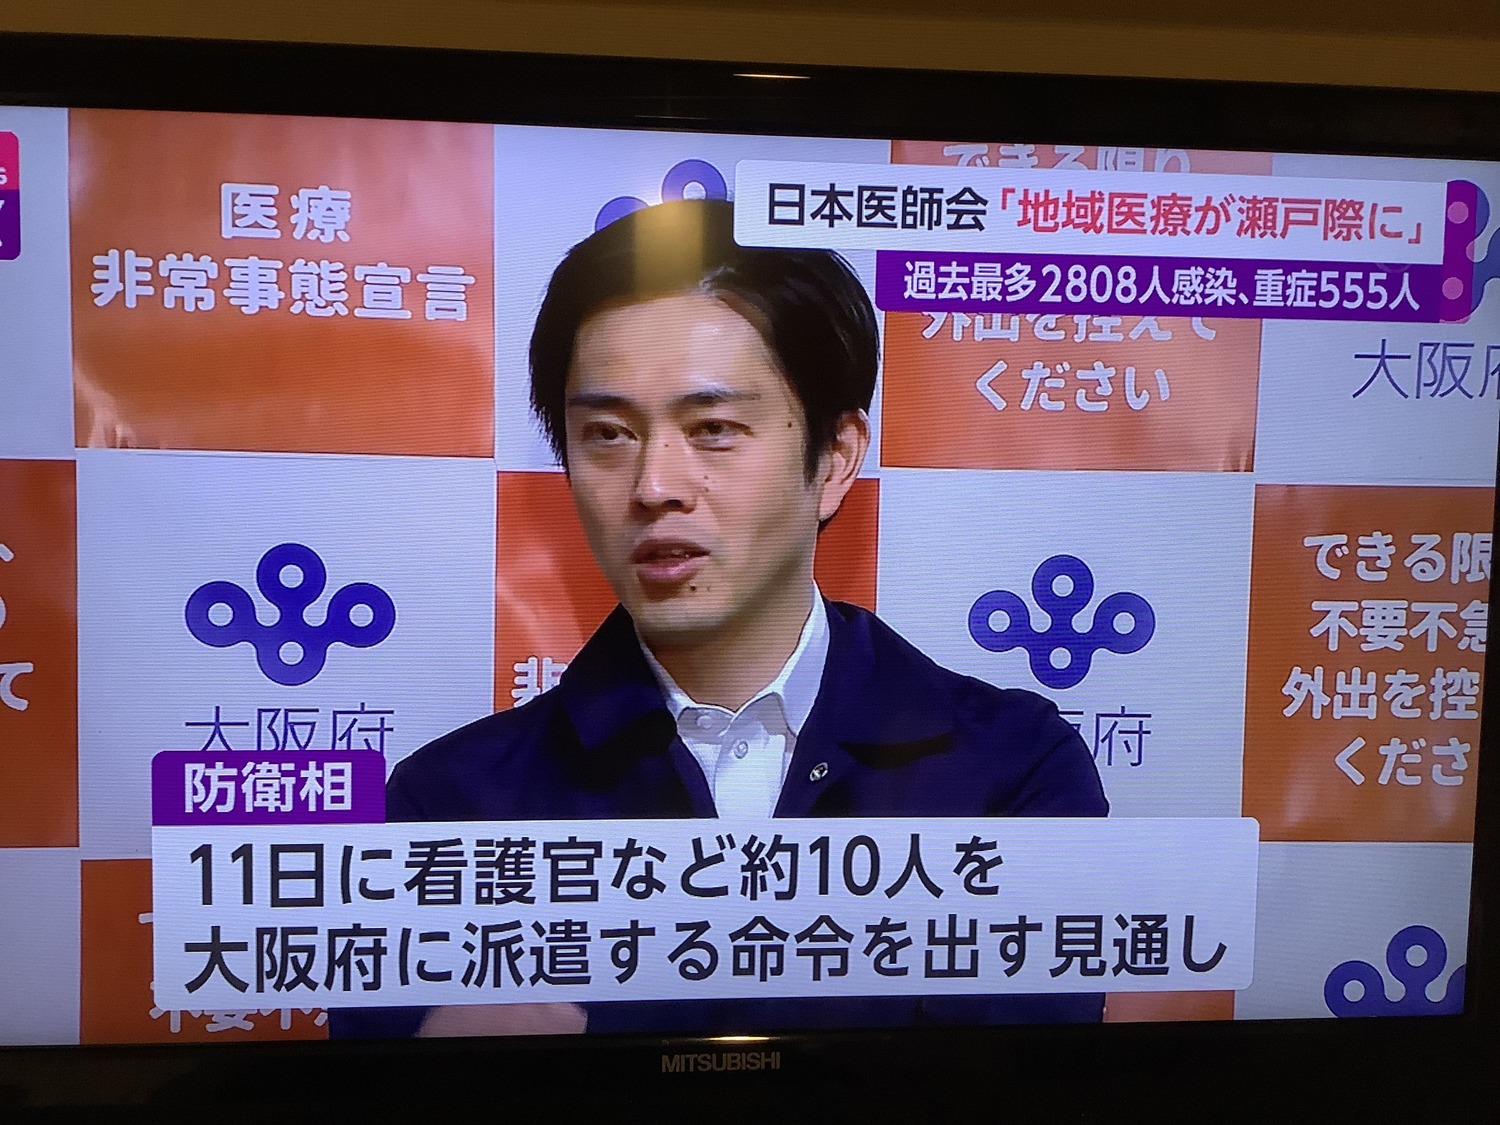 The far-right governor of Osaka Prefecture Yoshimura Yoshifumi also cooperated with Suga Yoshida to go, but the diagnosis continued to reach new highs, so he had to stop and now cooperated with the request of the Self-Defense Forces.  Photo: taken from the Asahi TV news program 